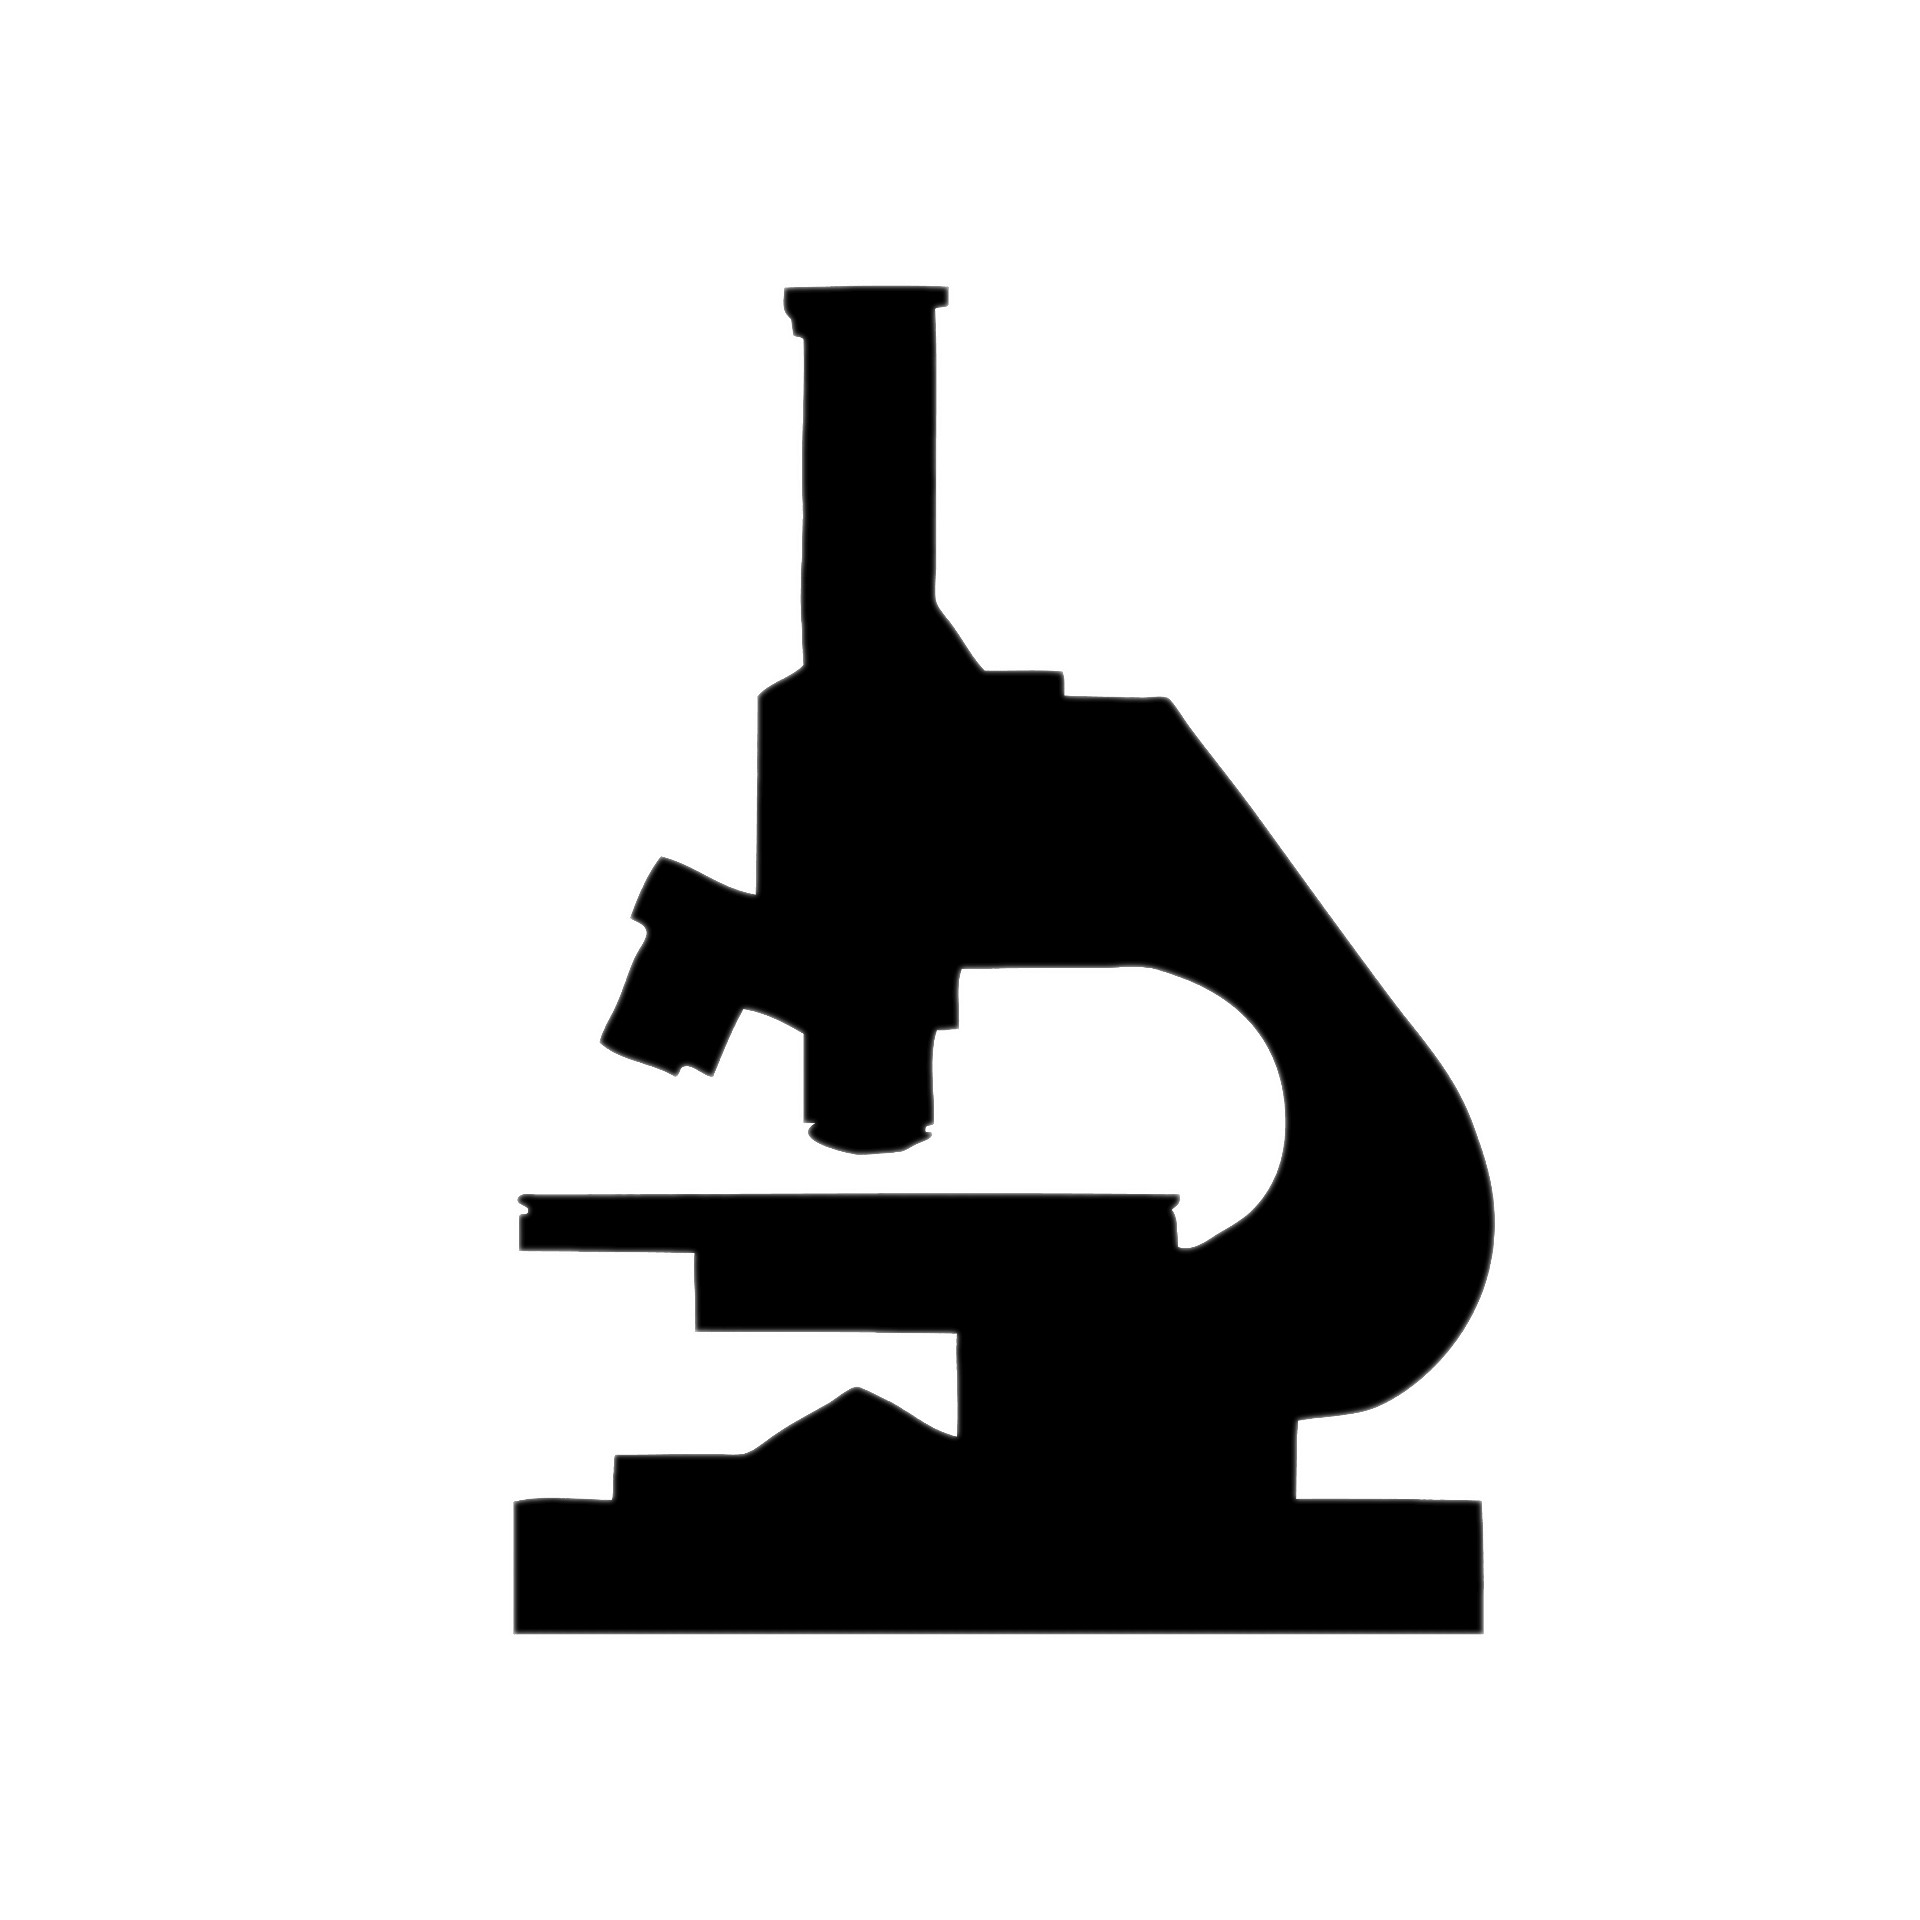 Microscope Silhouette Clipart icons